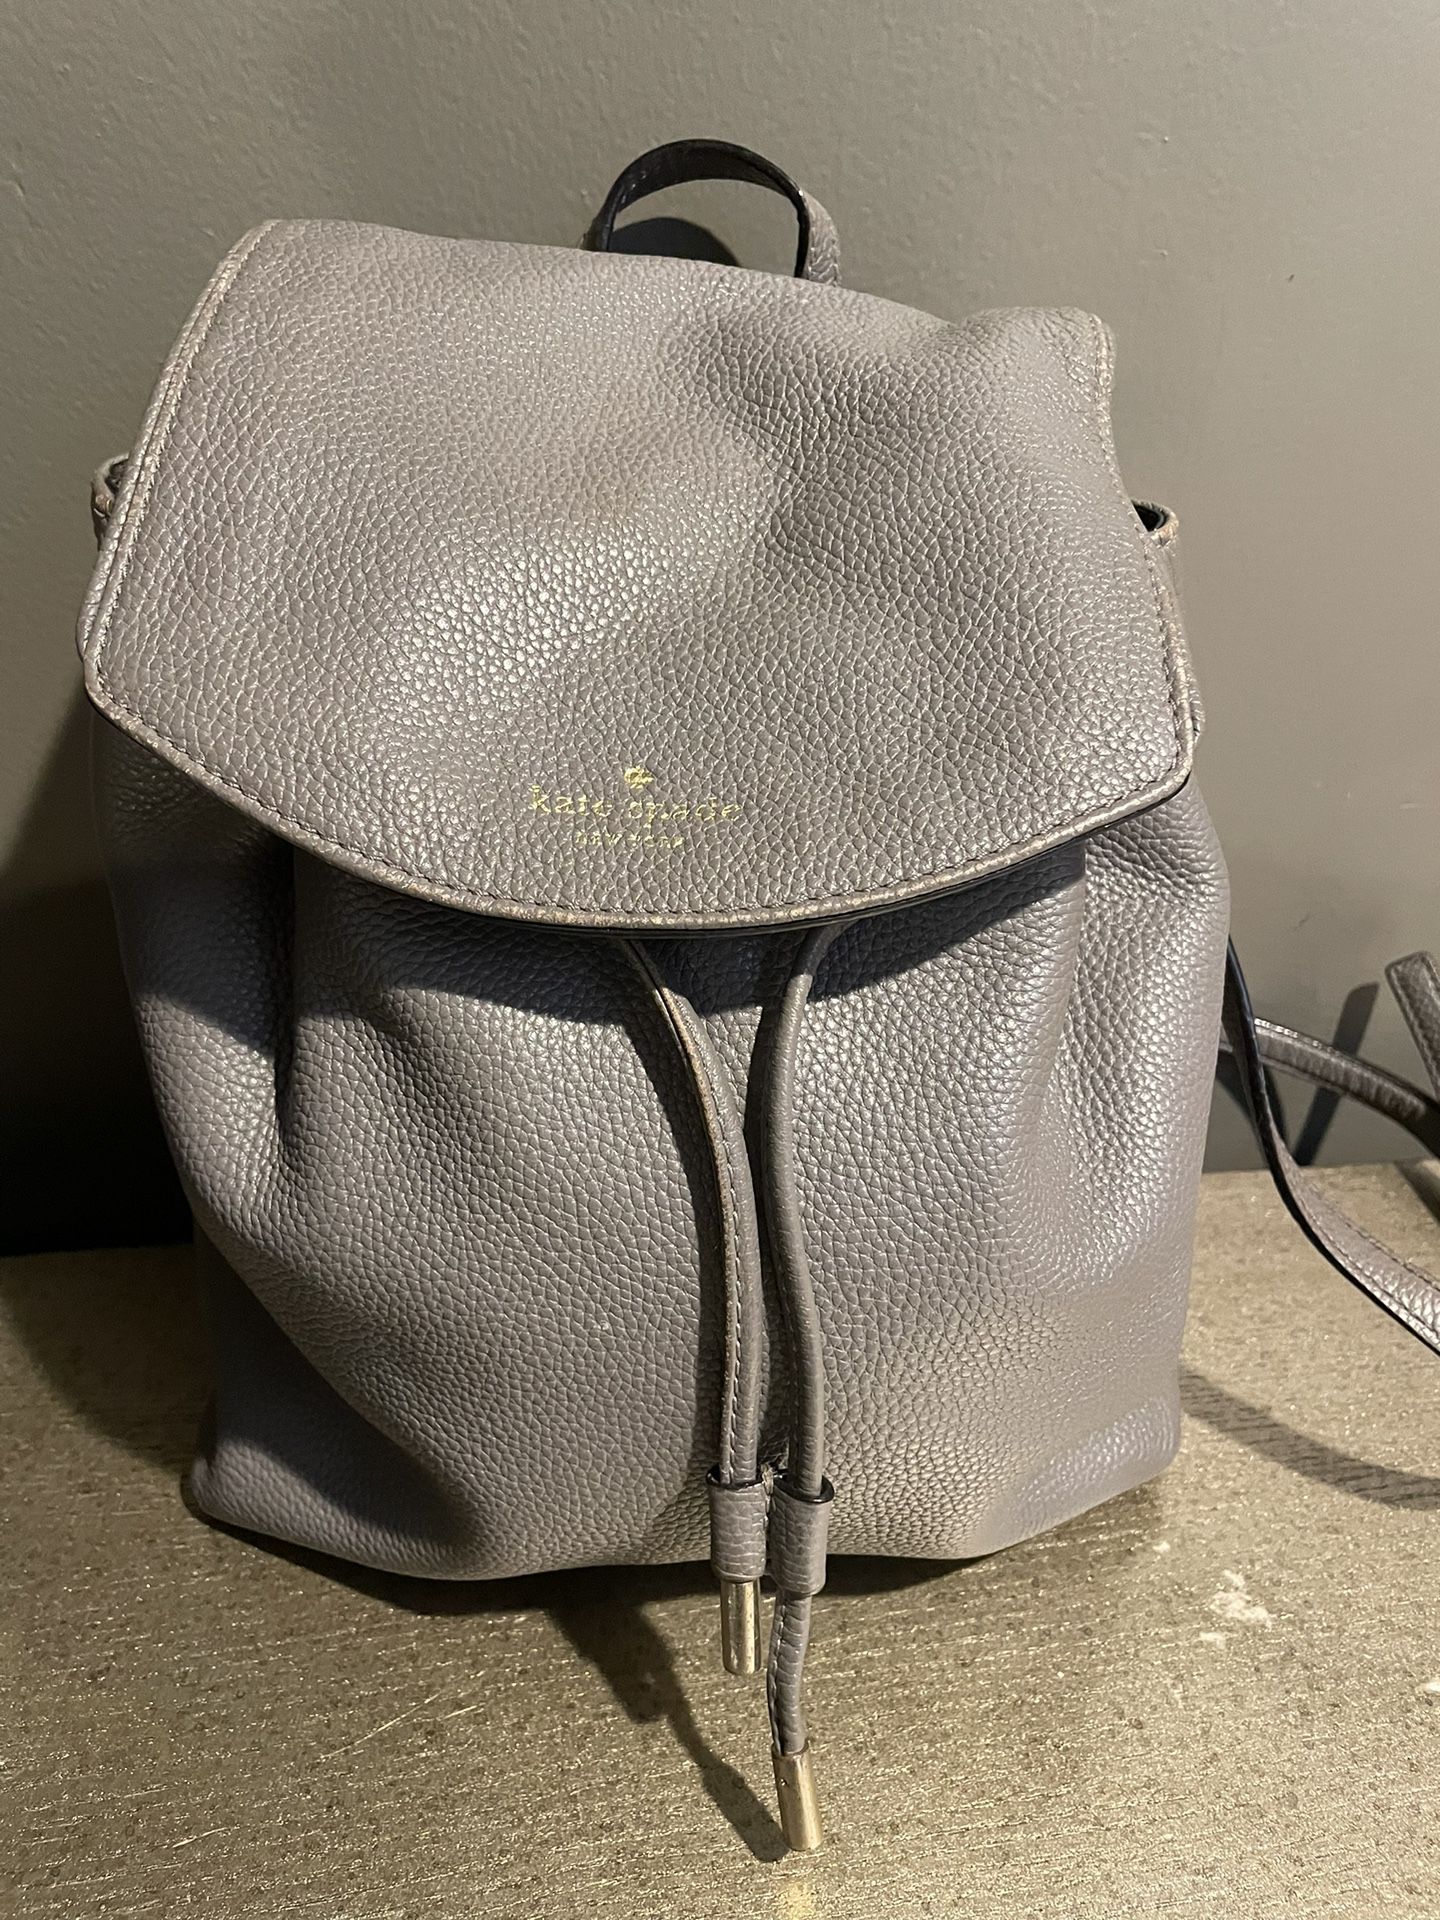 Kate Spade Backpack for Sale in San Diego, CA - OfferUp